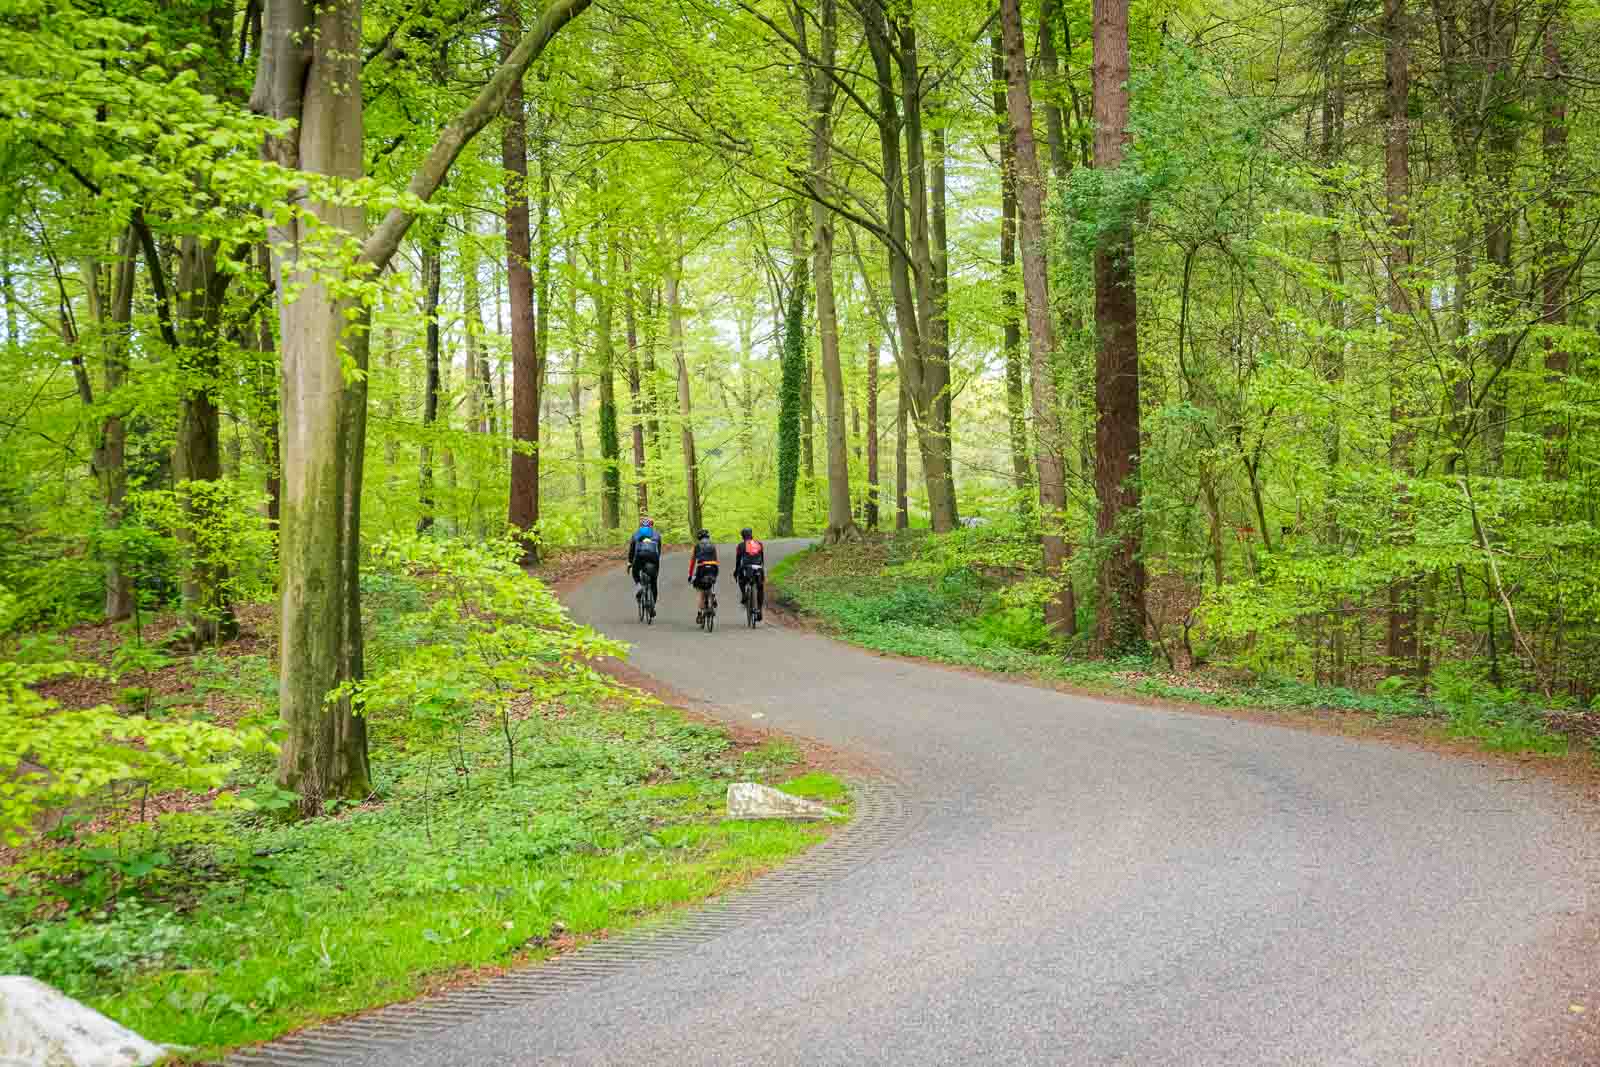 Three cyclists riding side by side on a road in the forest